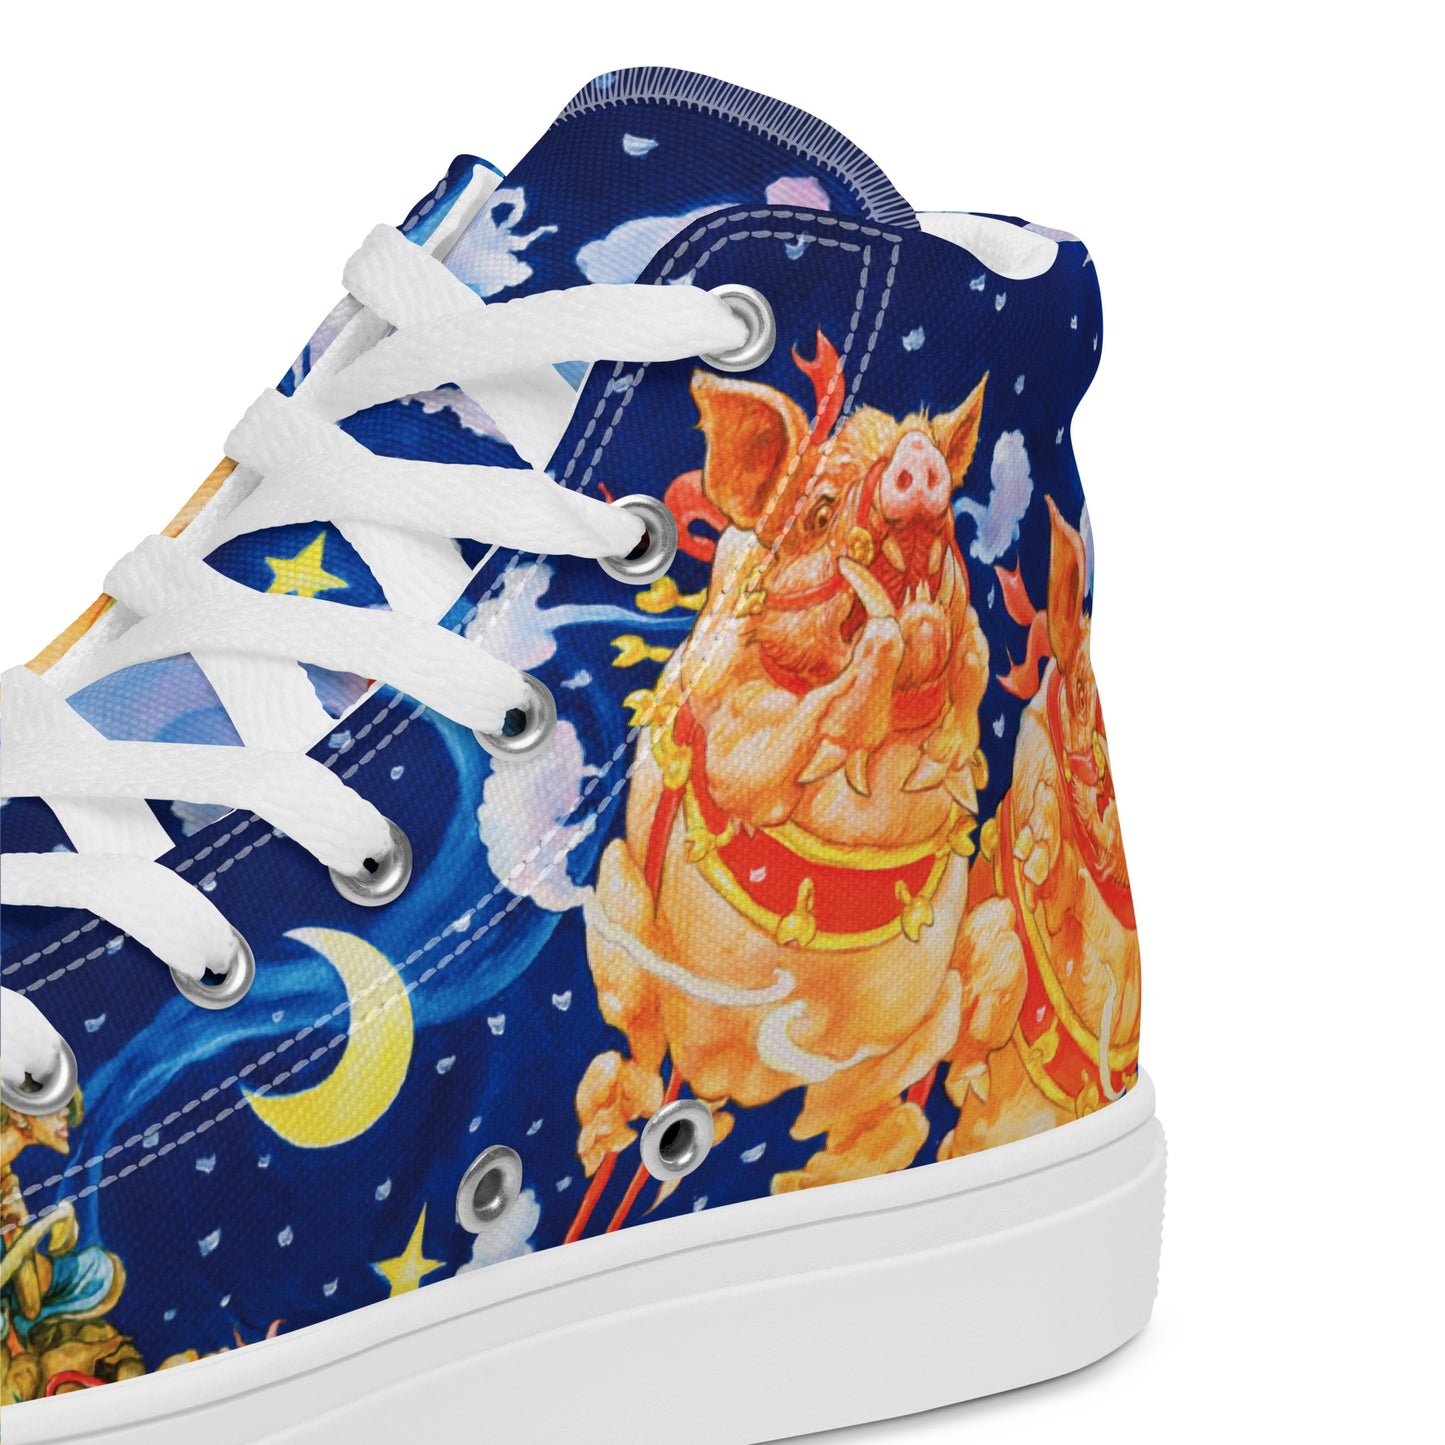 Women’s Hogfather High Top Canvas Shoes - Free Shipping *US SIZES SHOWN! USE CHART!